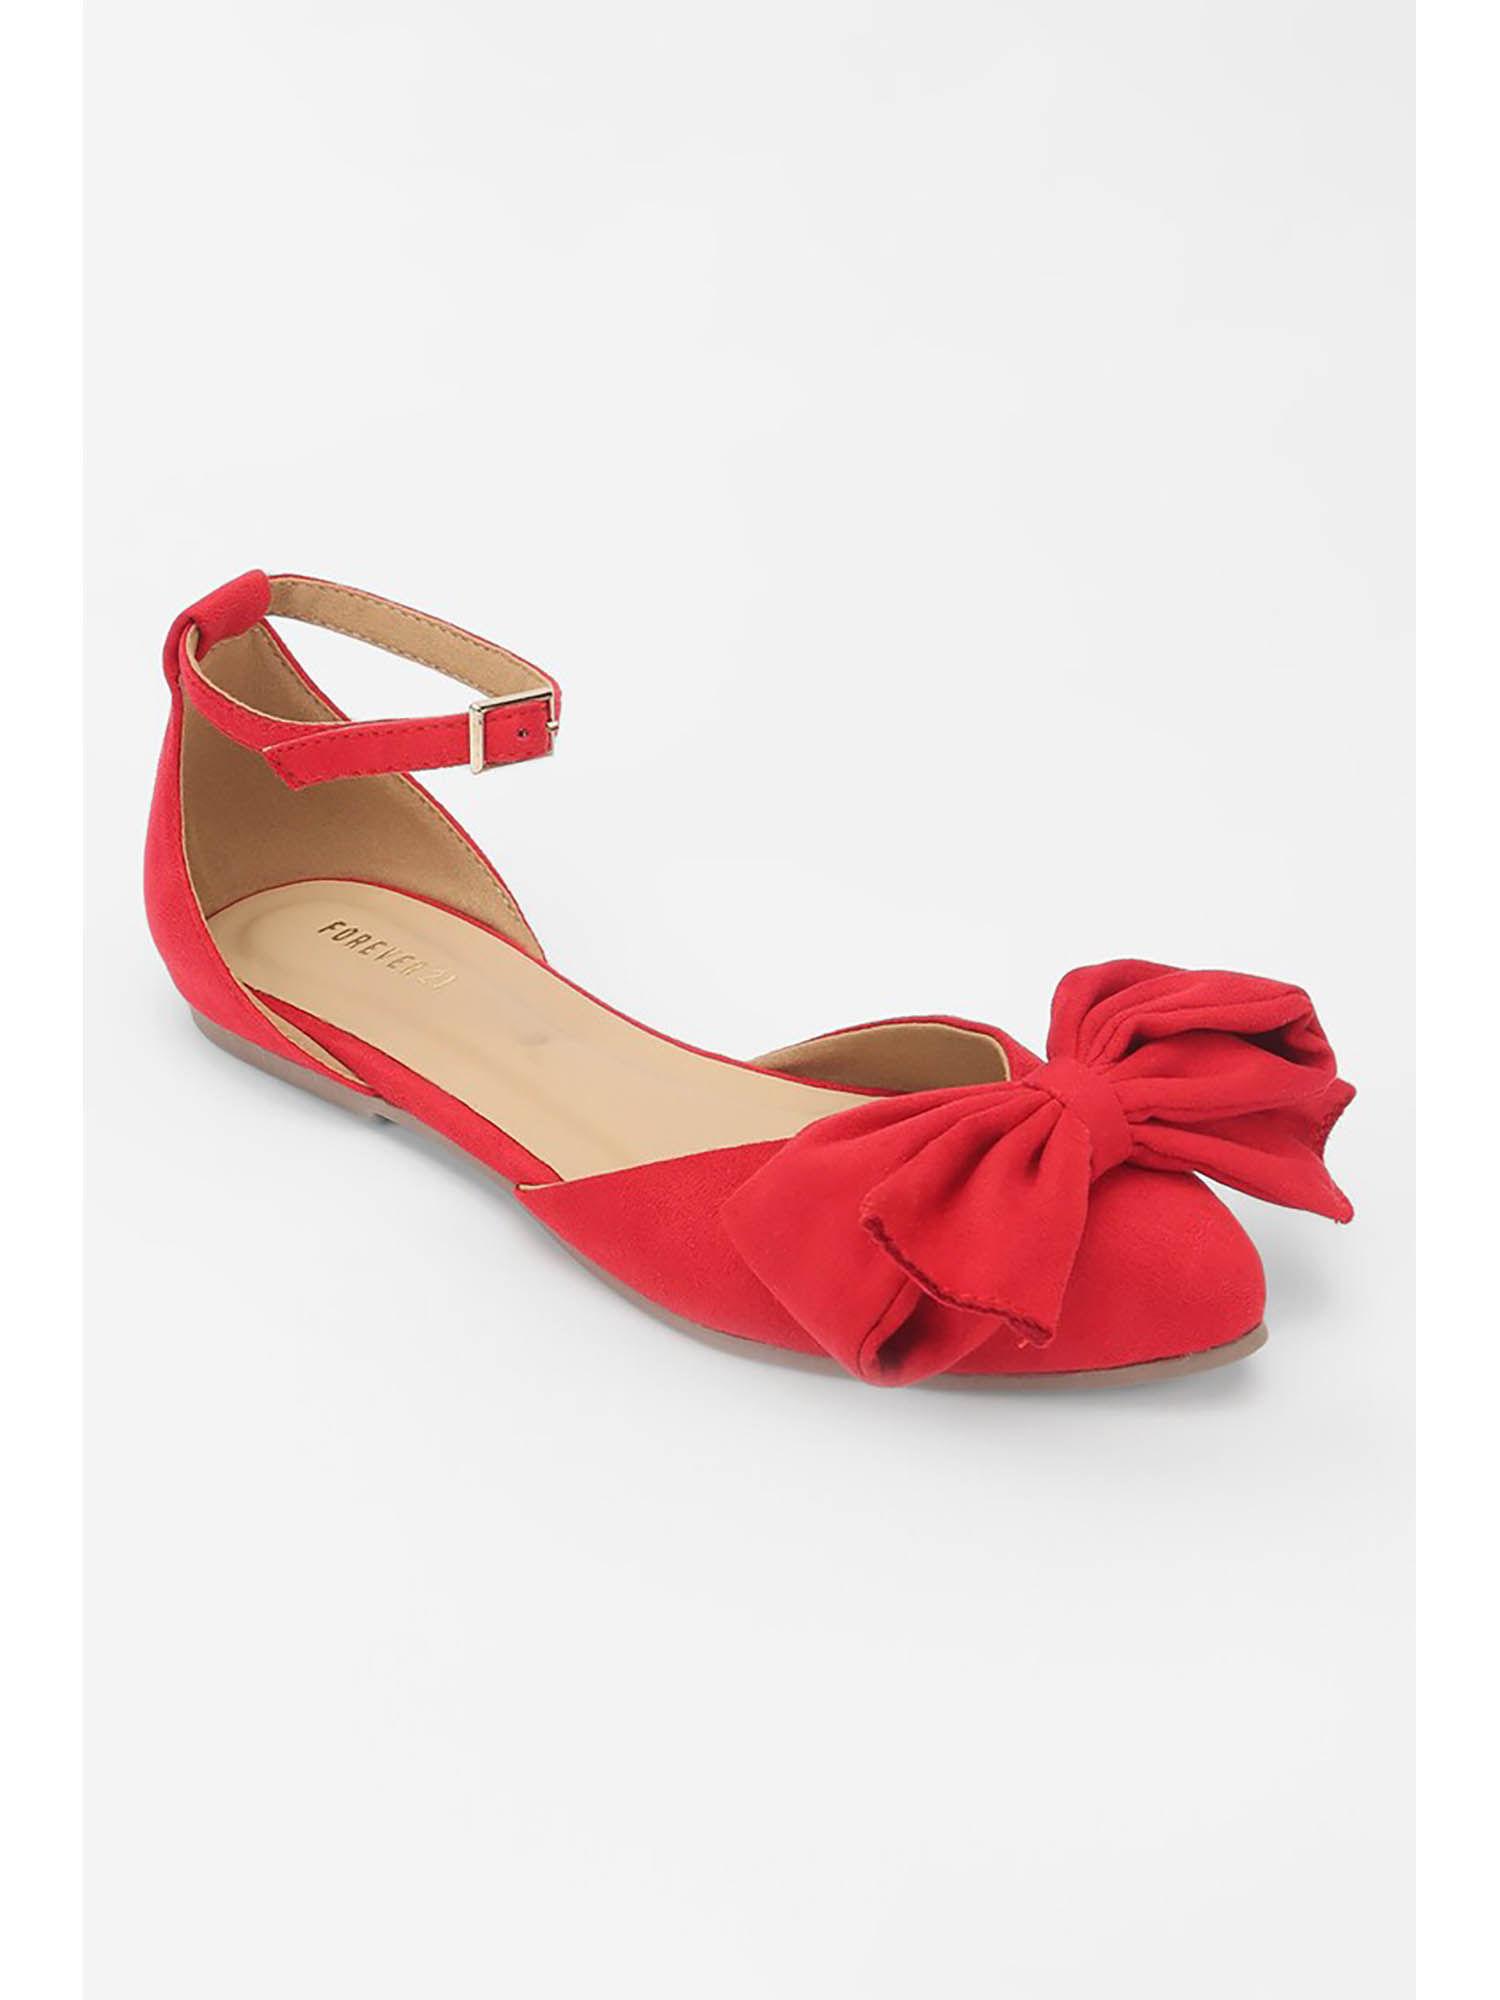 solid red flats sandals